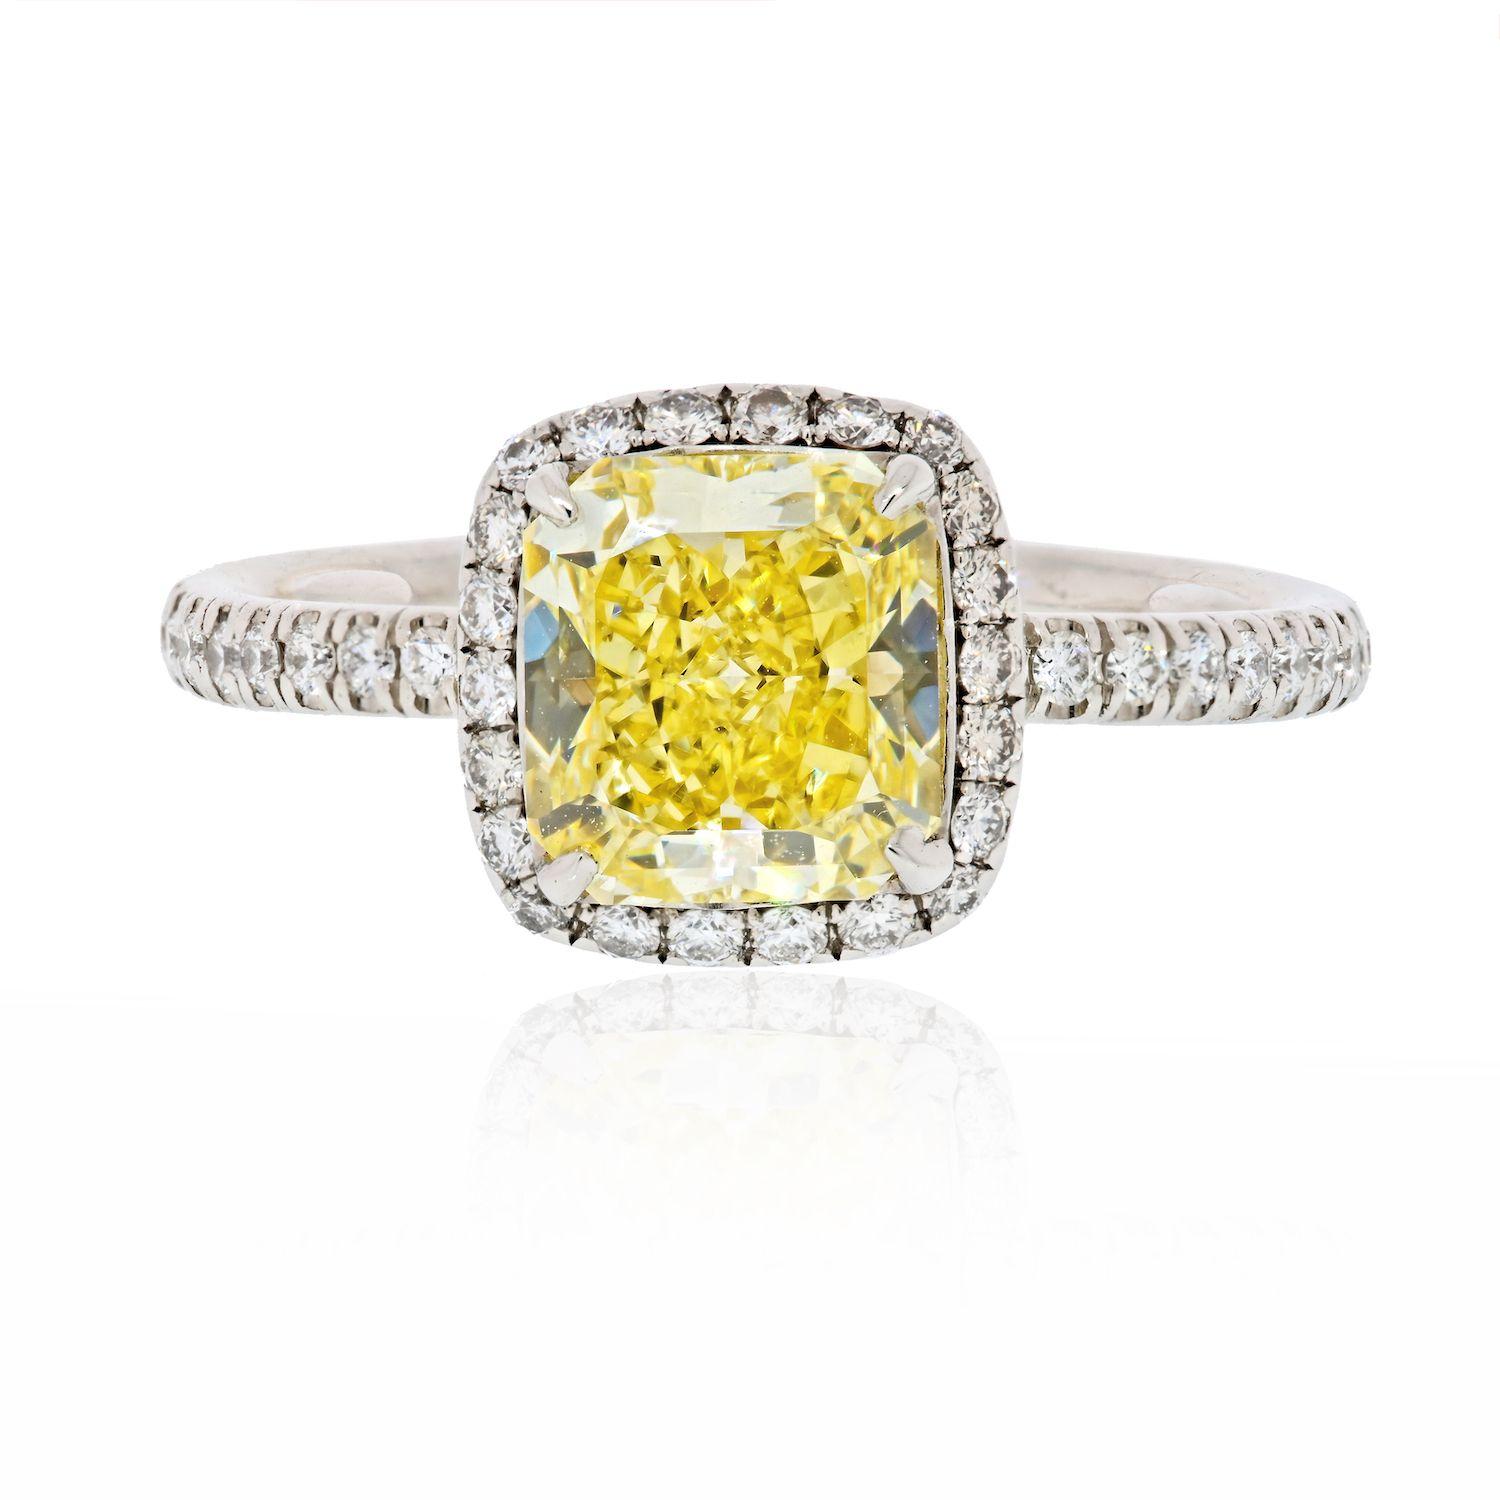 This is a beautiful natural fancy yellow cushion cut diamond engagement ring crafted in platinum mounted in the original Harry Winston pave diamond Setting. 

Center diamond is a 1.60 Carat GIA Certified Natural Fancy Yellow VVS2 clarity diamond of